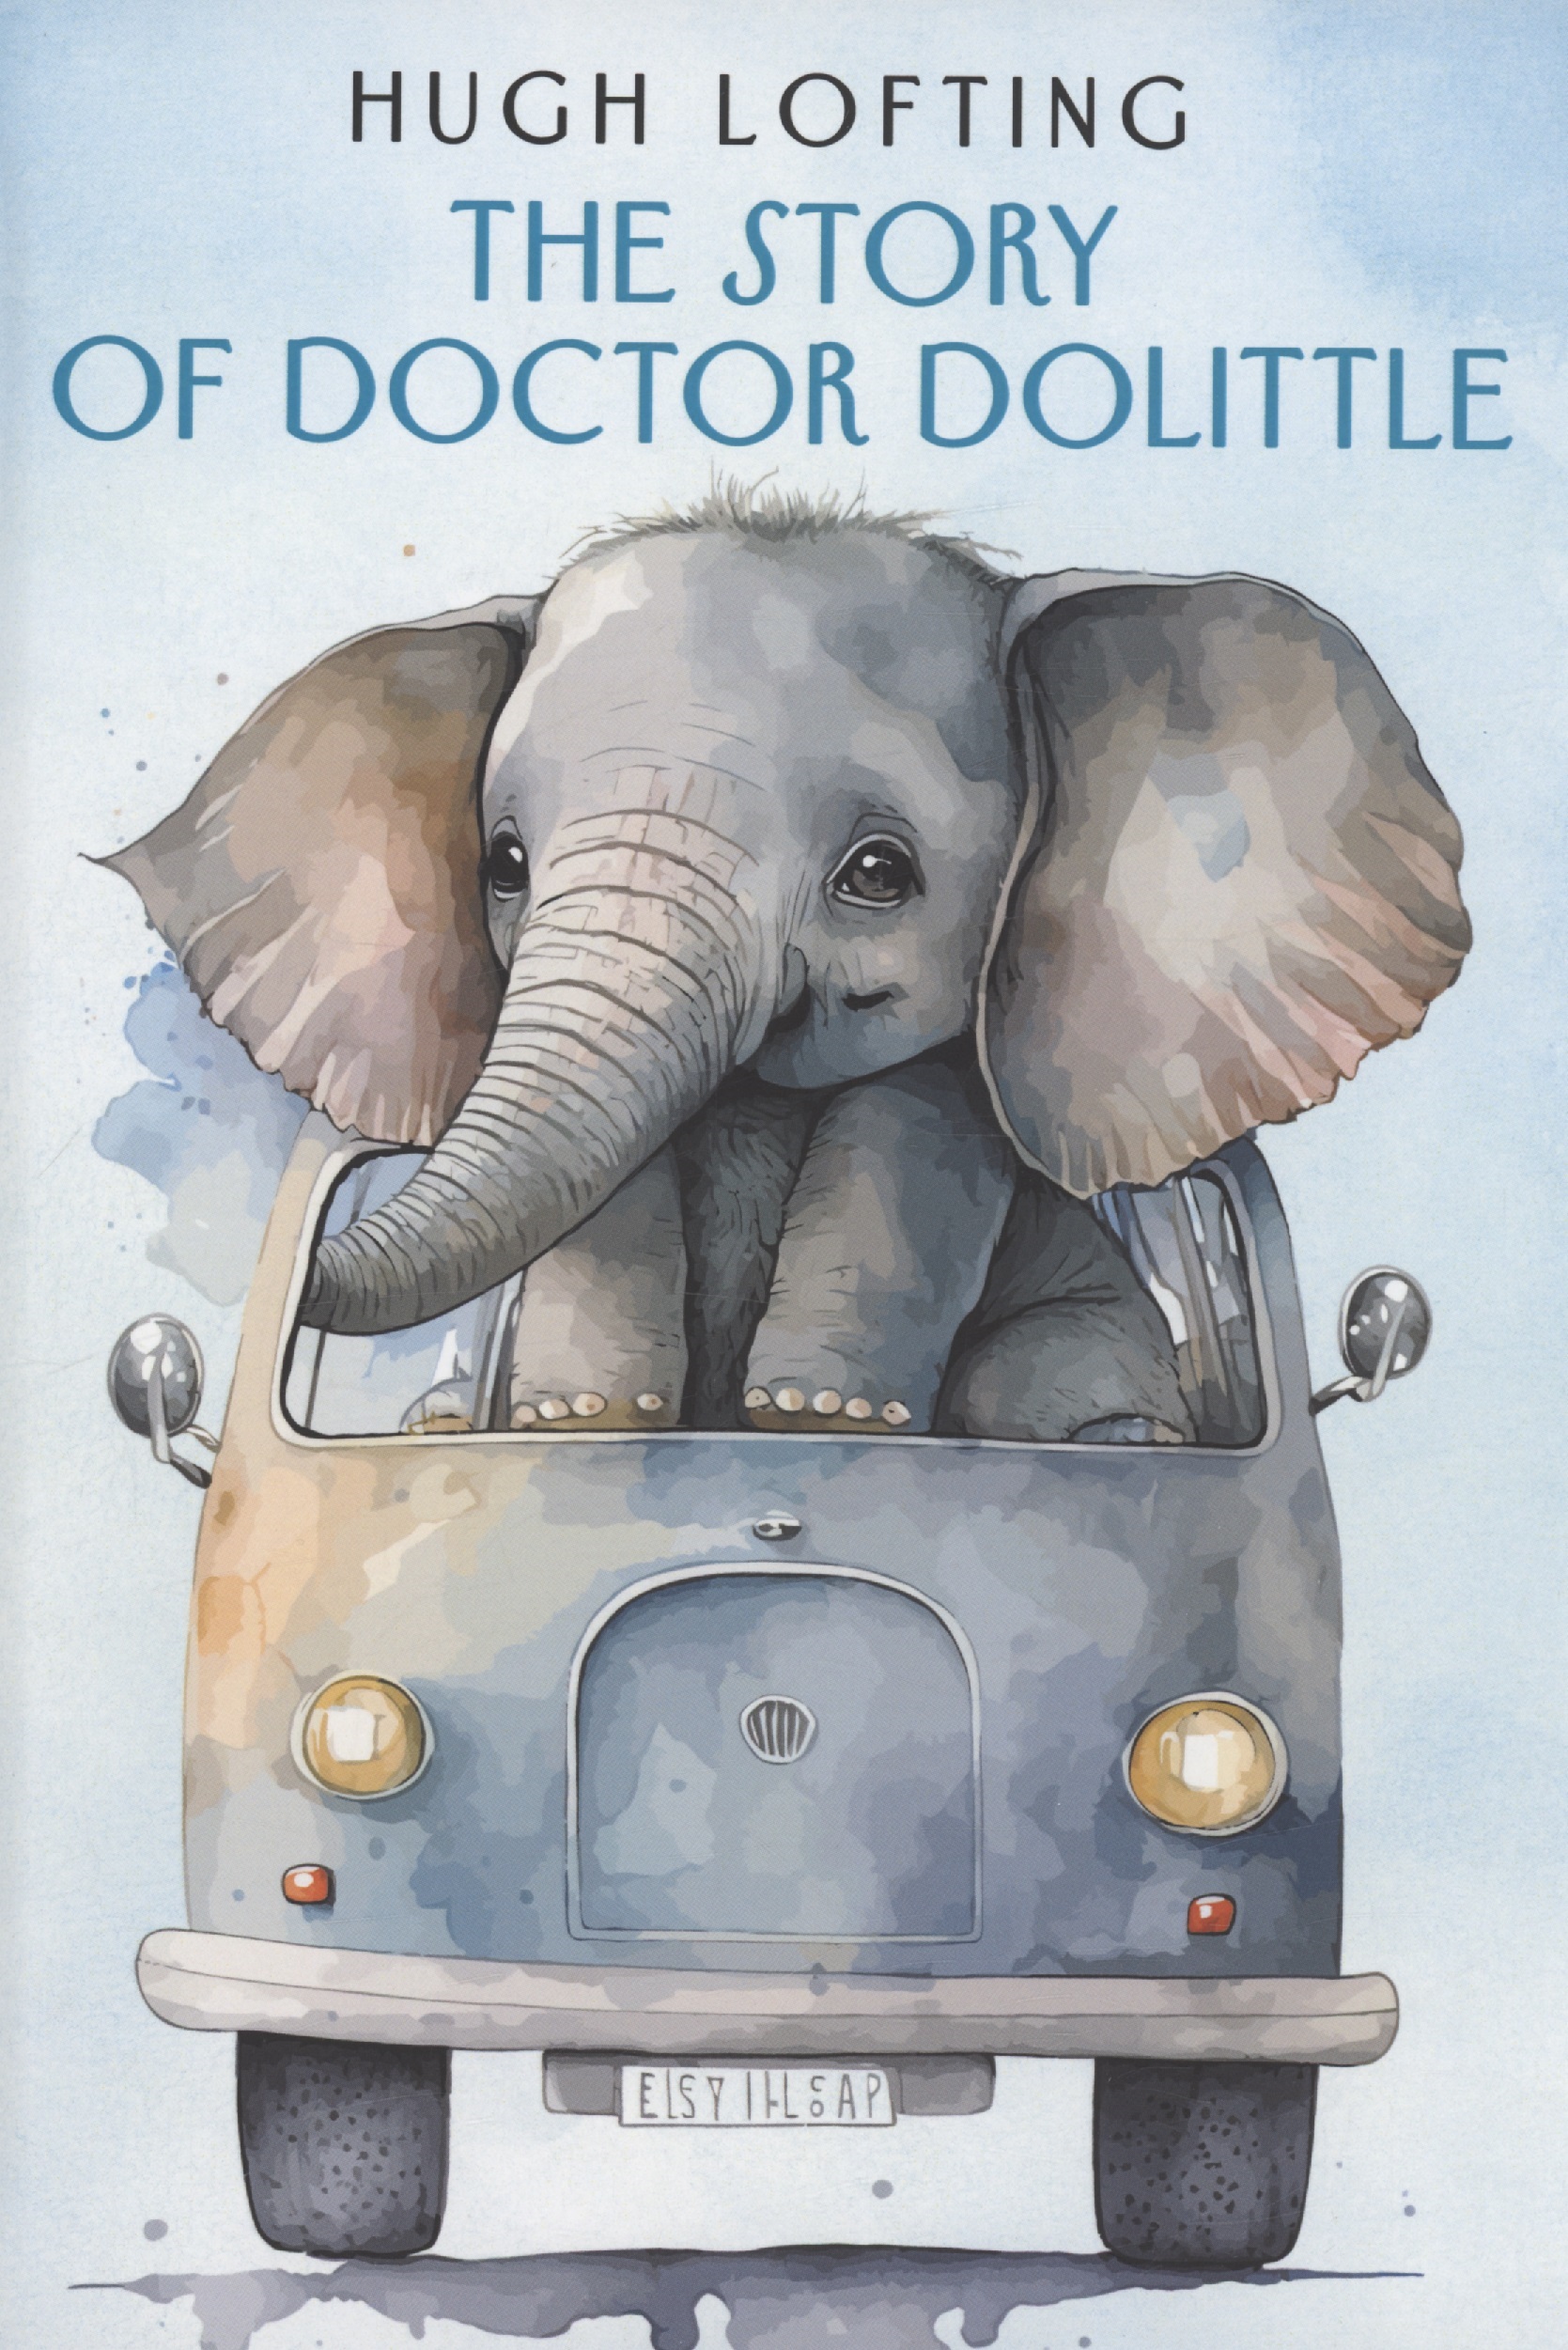 The Story of Doctor Dolittle lofting hugh the story of doctor dolittle